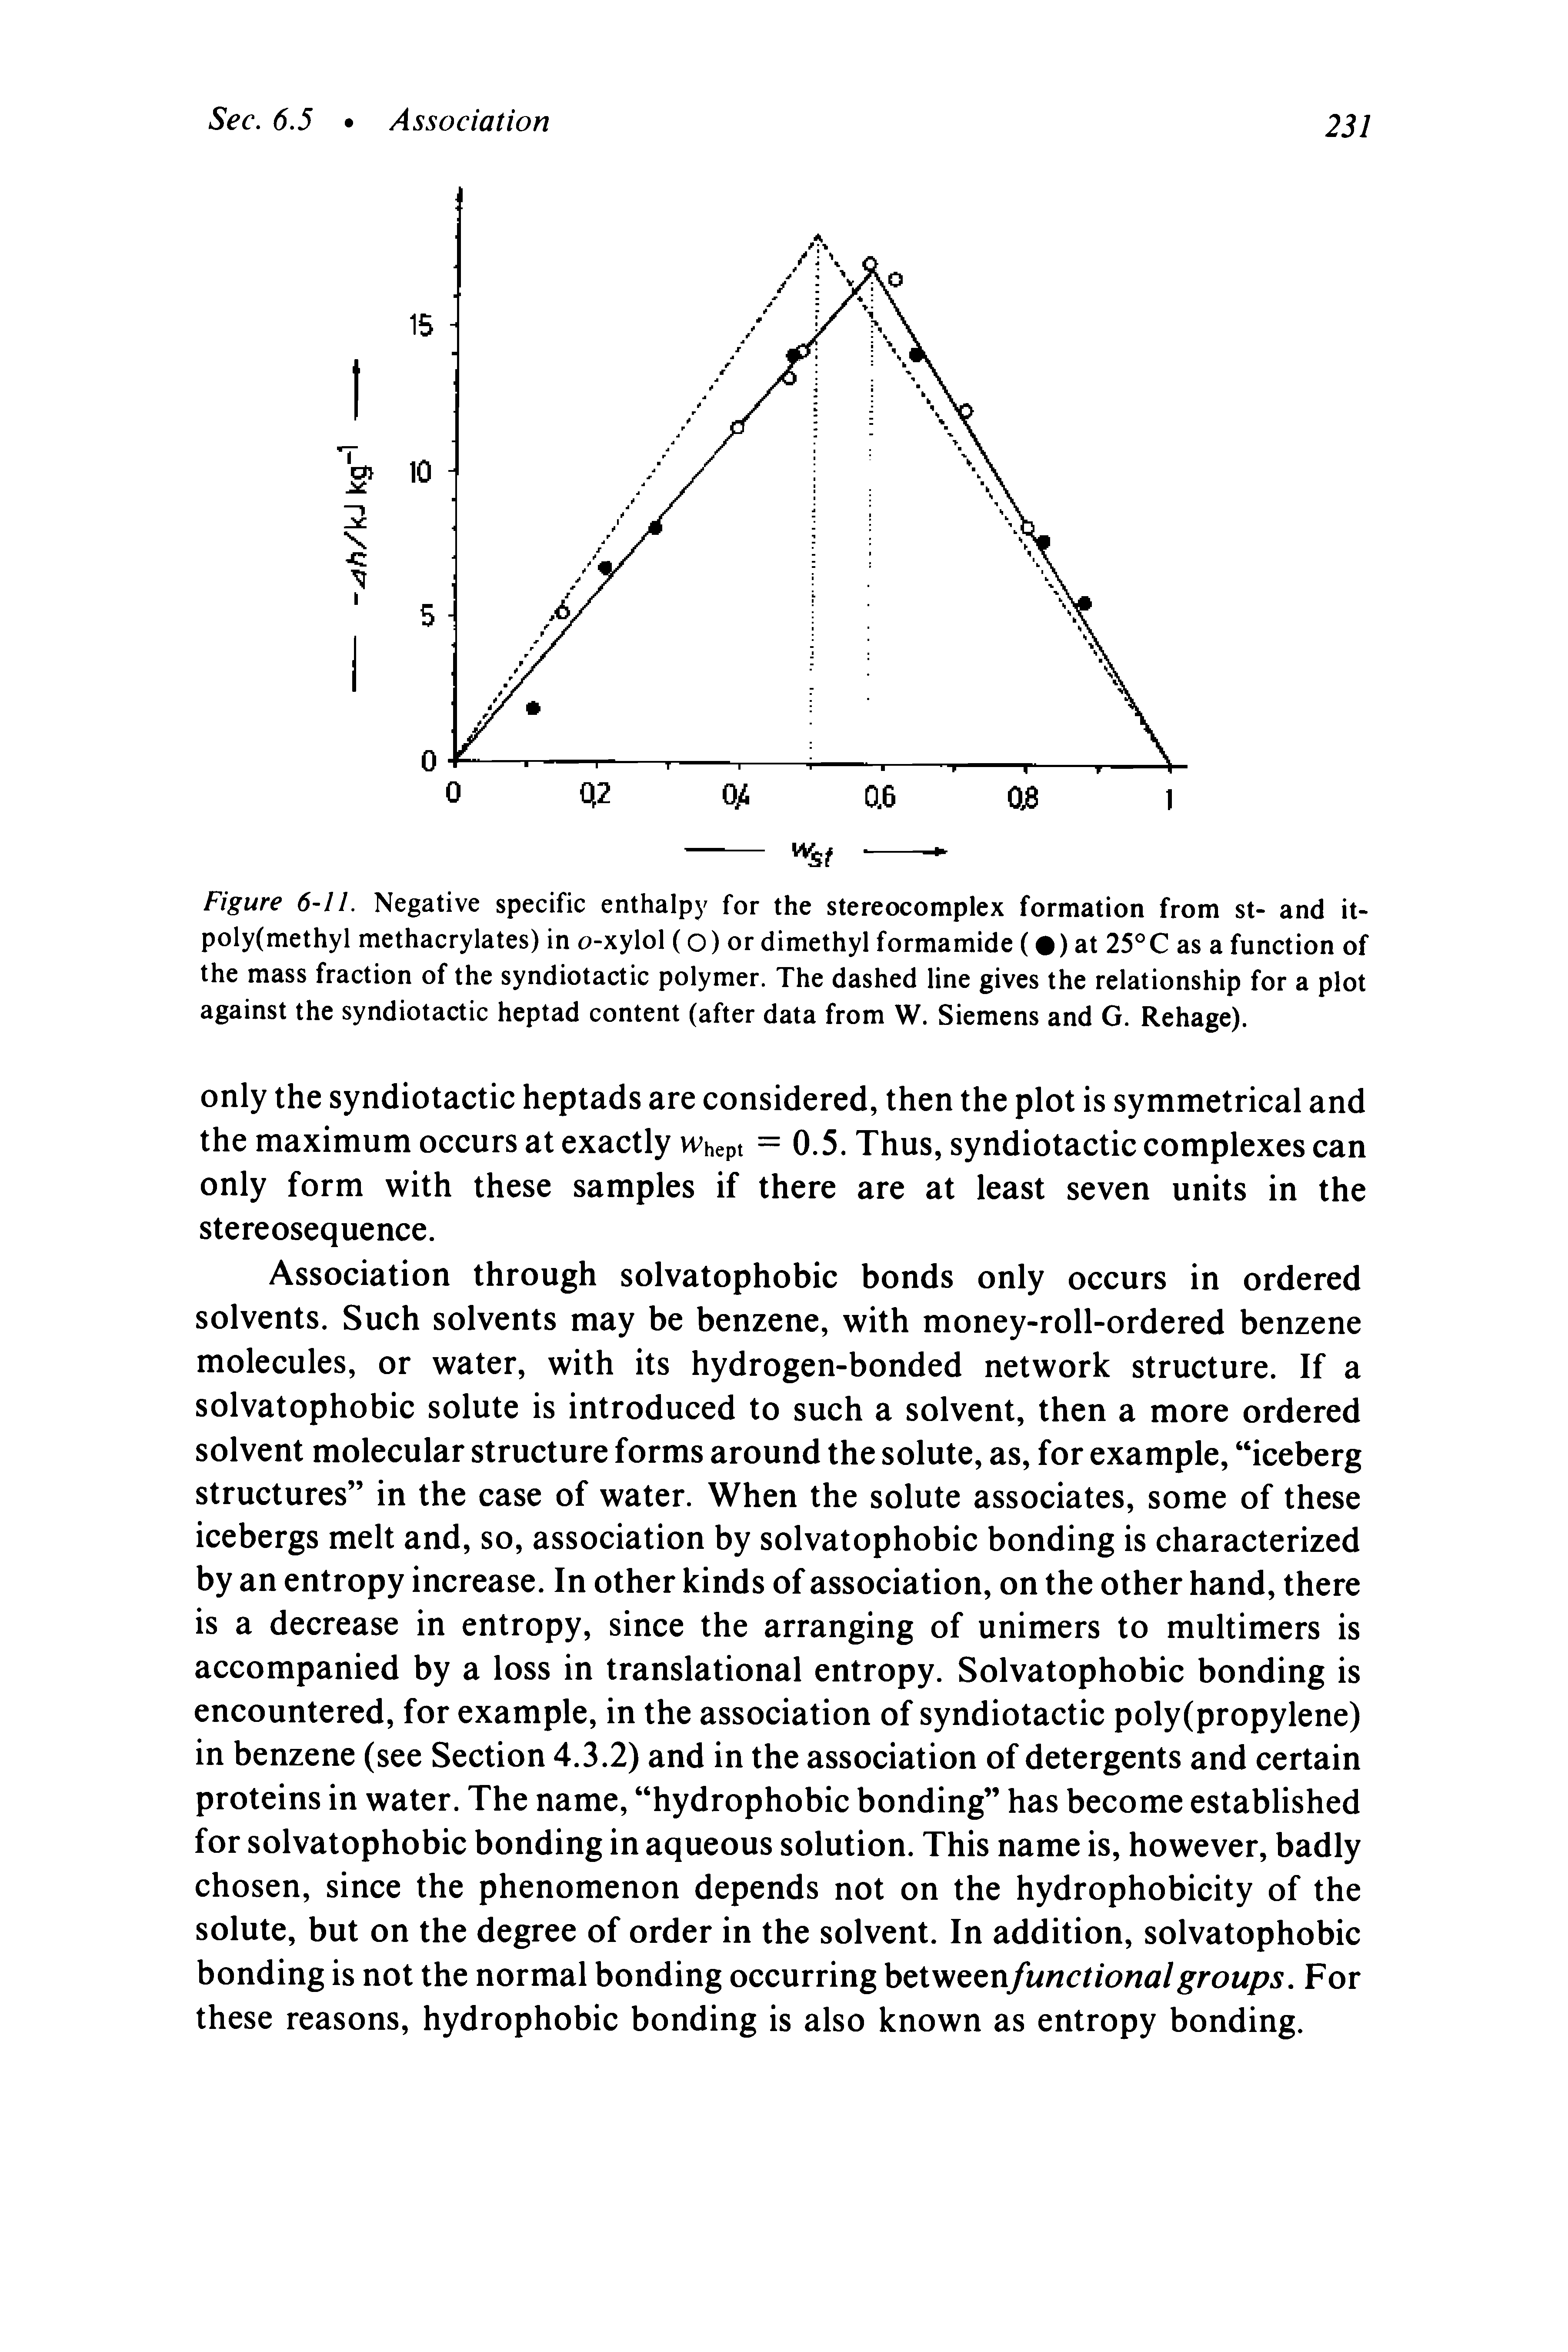 Figure 6-11. Negative specific enthalpy for the stereocomplex formation from st- and it-poly(methyl methacrylates) in o-xylol (O) or dimethyl formamide ( ) at 25°C as a function of the mass fraction of the syndiotactic polymer. The dashed line gives the relationship for a plot against the syndiotactic heptad content (after data from W. Siemens and G. Rehage).